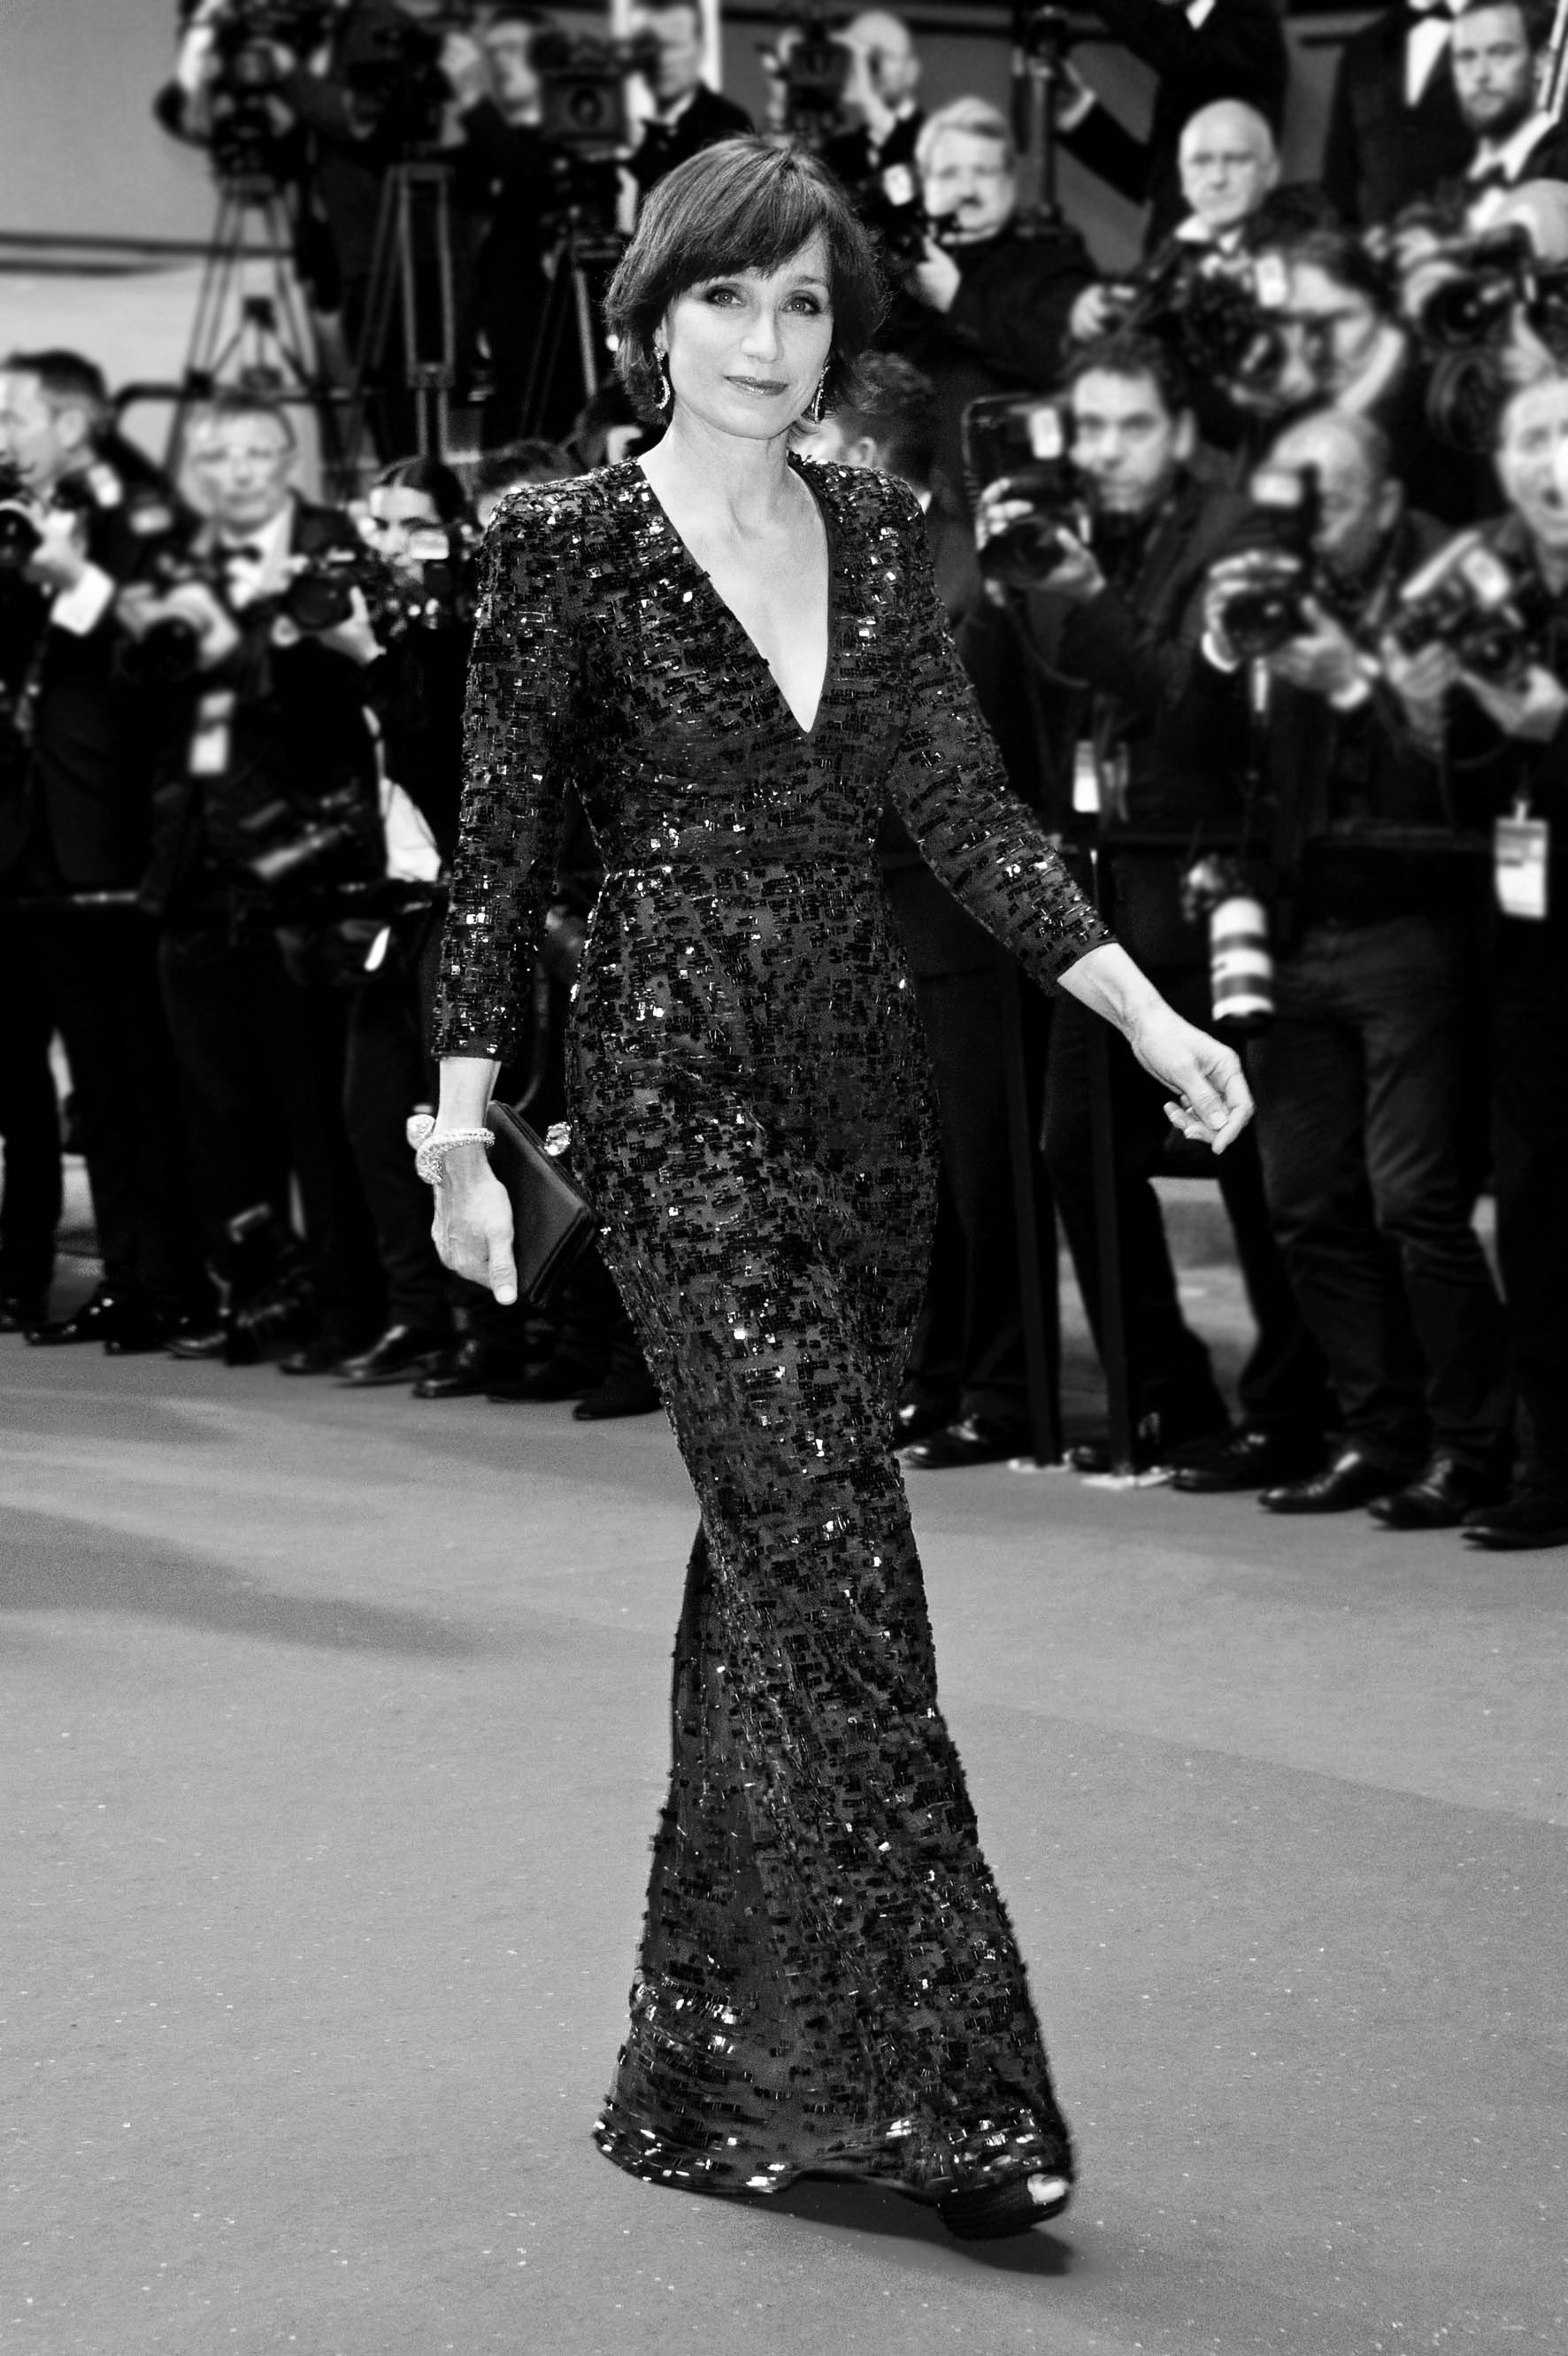 CANNES : SHARPEST LOOK OF THE DAY / KRISTIN SCOTT THOMAS WEARING A GIORGIO ARMANI PRIVE DRESS